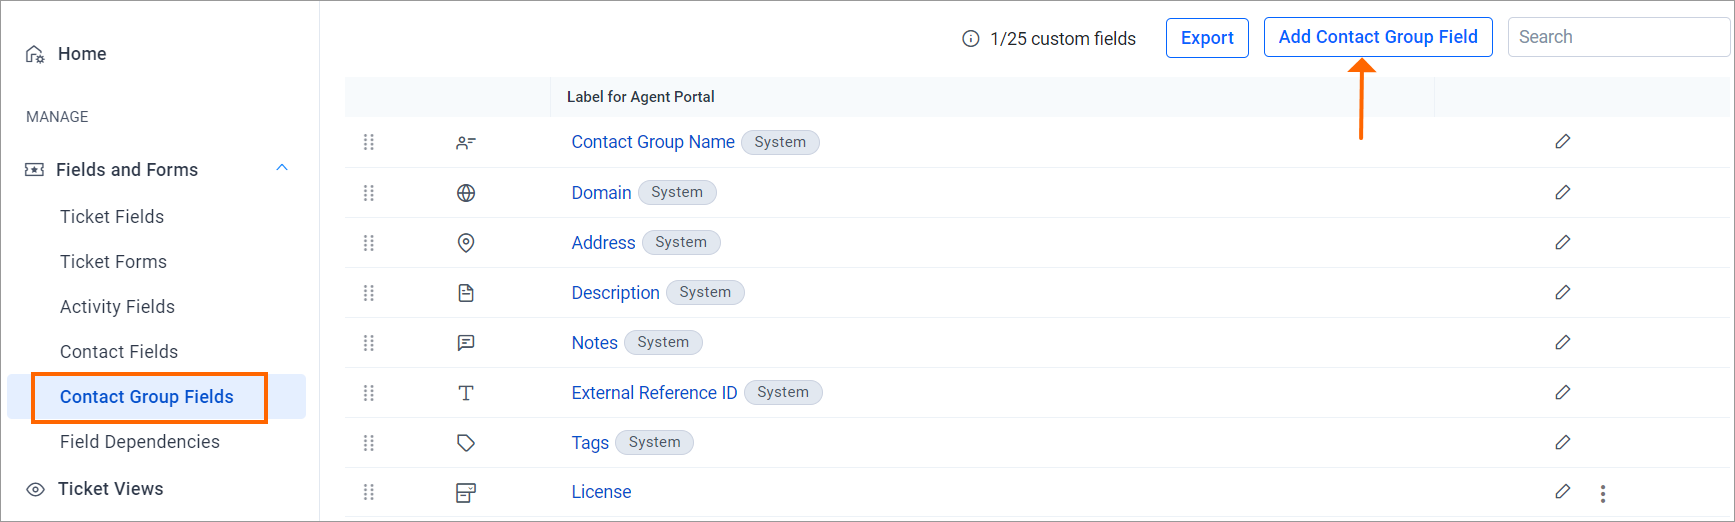 Default_and_Custom_Contact_Group_Fields_List.png